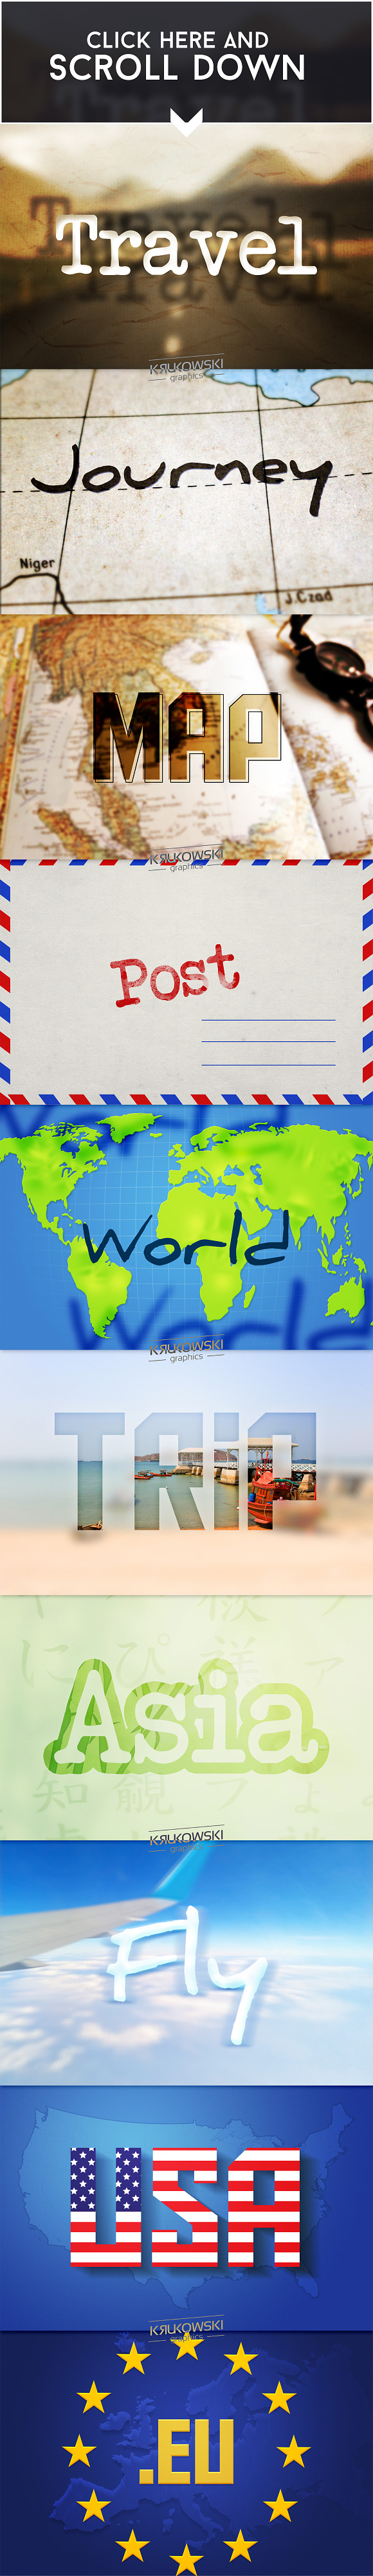 Travel Text Effects Mockup in Photoshop Layer Styles - product preview 1